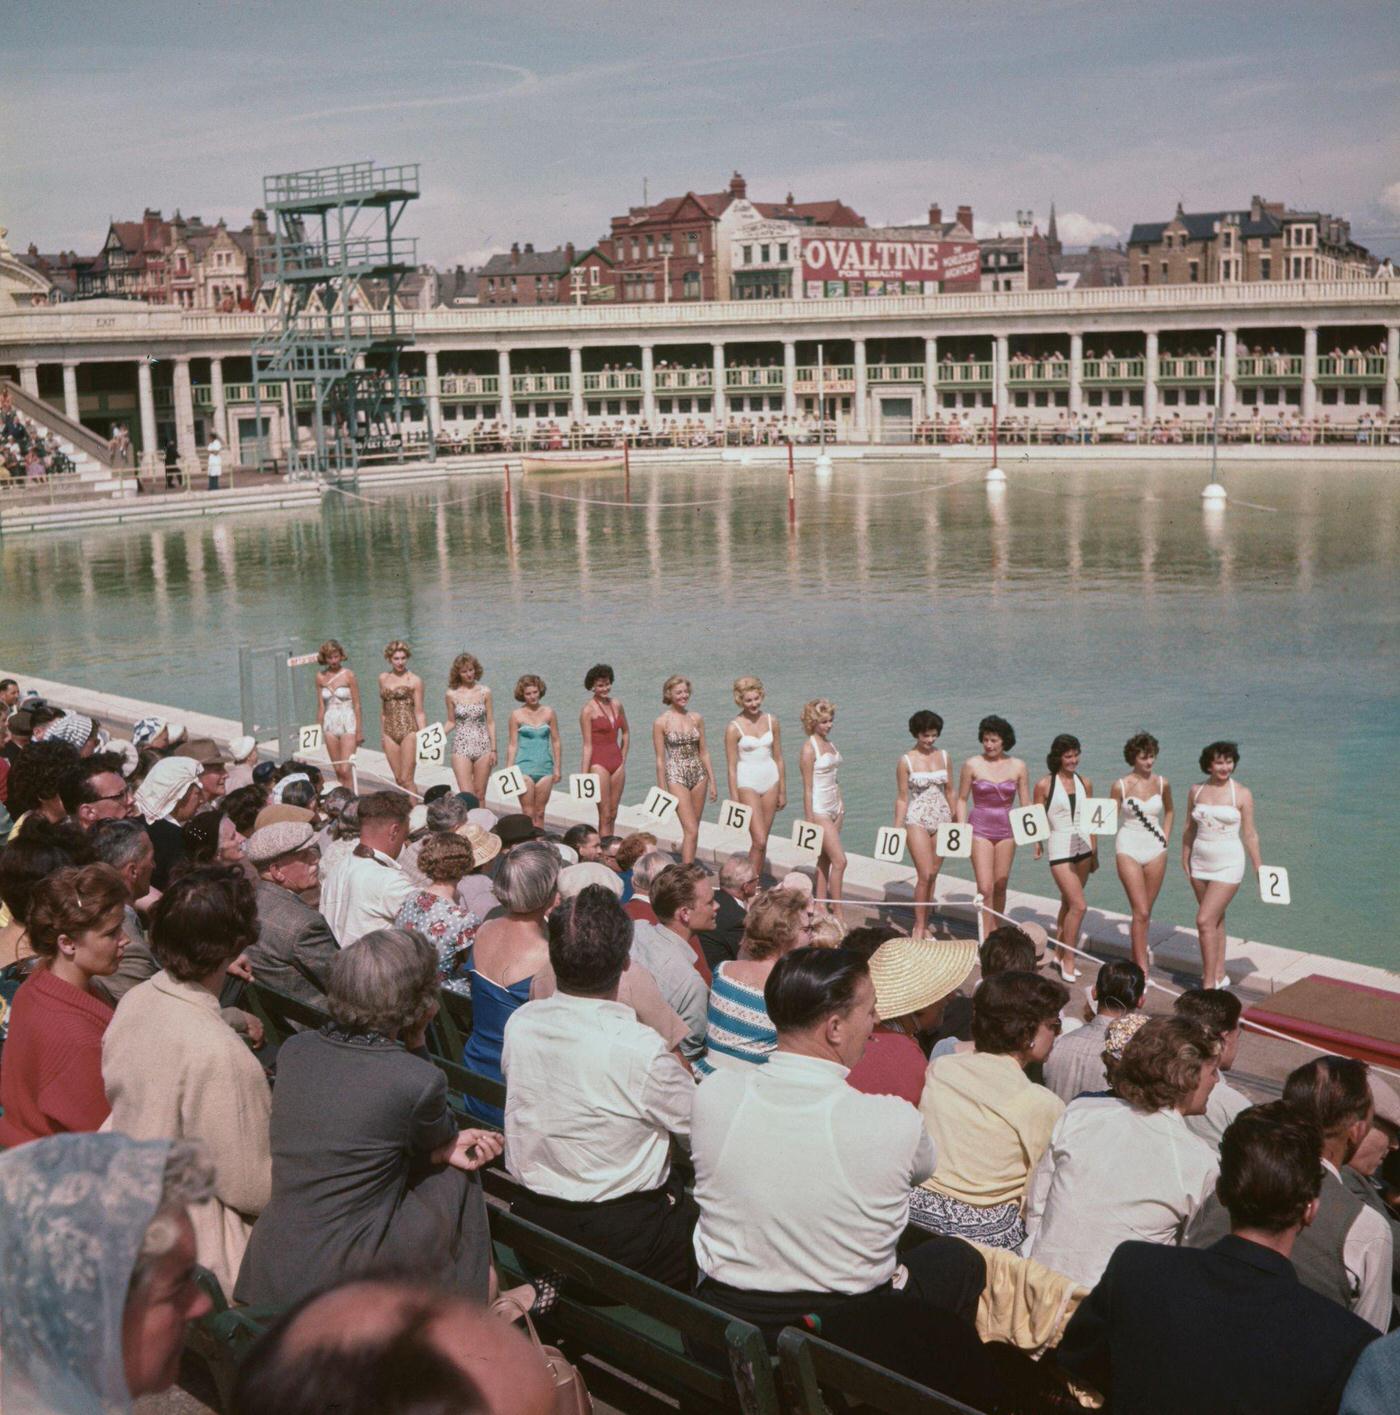 A line up of women pose in bathing suits as they take part in a beauty contest at South Shore open air swimming pool, 1960